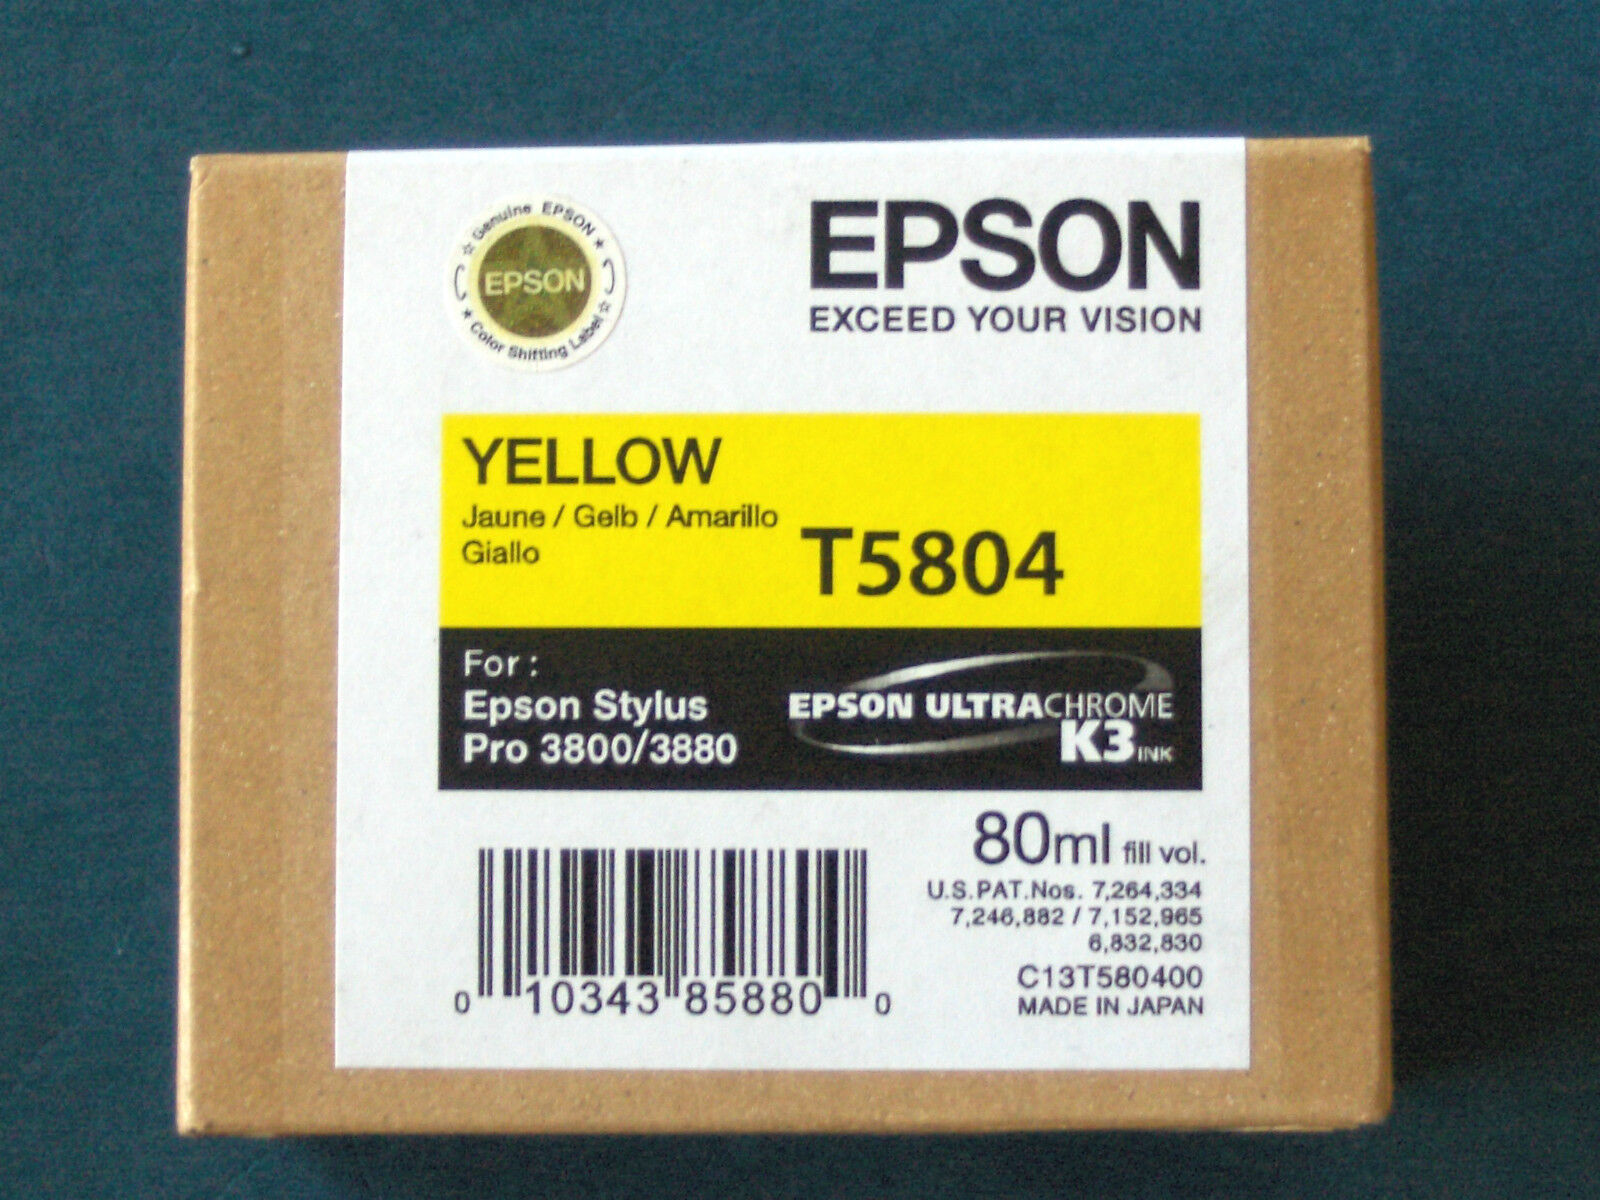 New in Box Exp 10-2023 Genuine Epson Pro 3800 3880 Yellow K3 Ink T5804 T580400